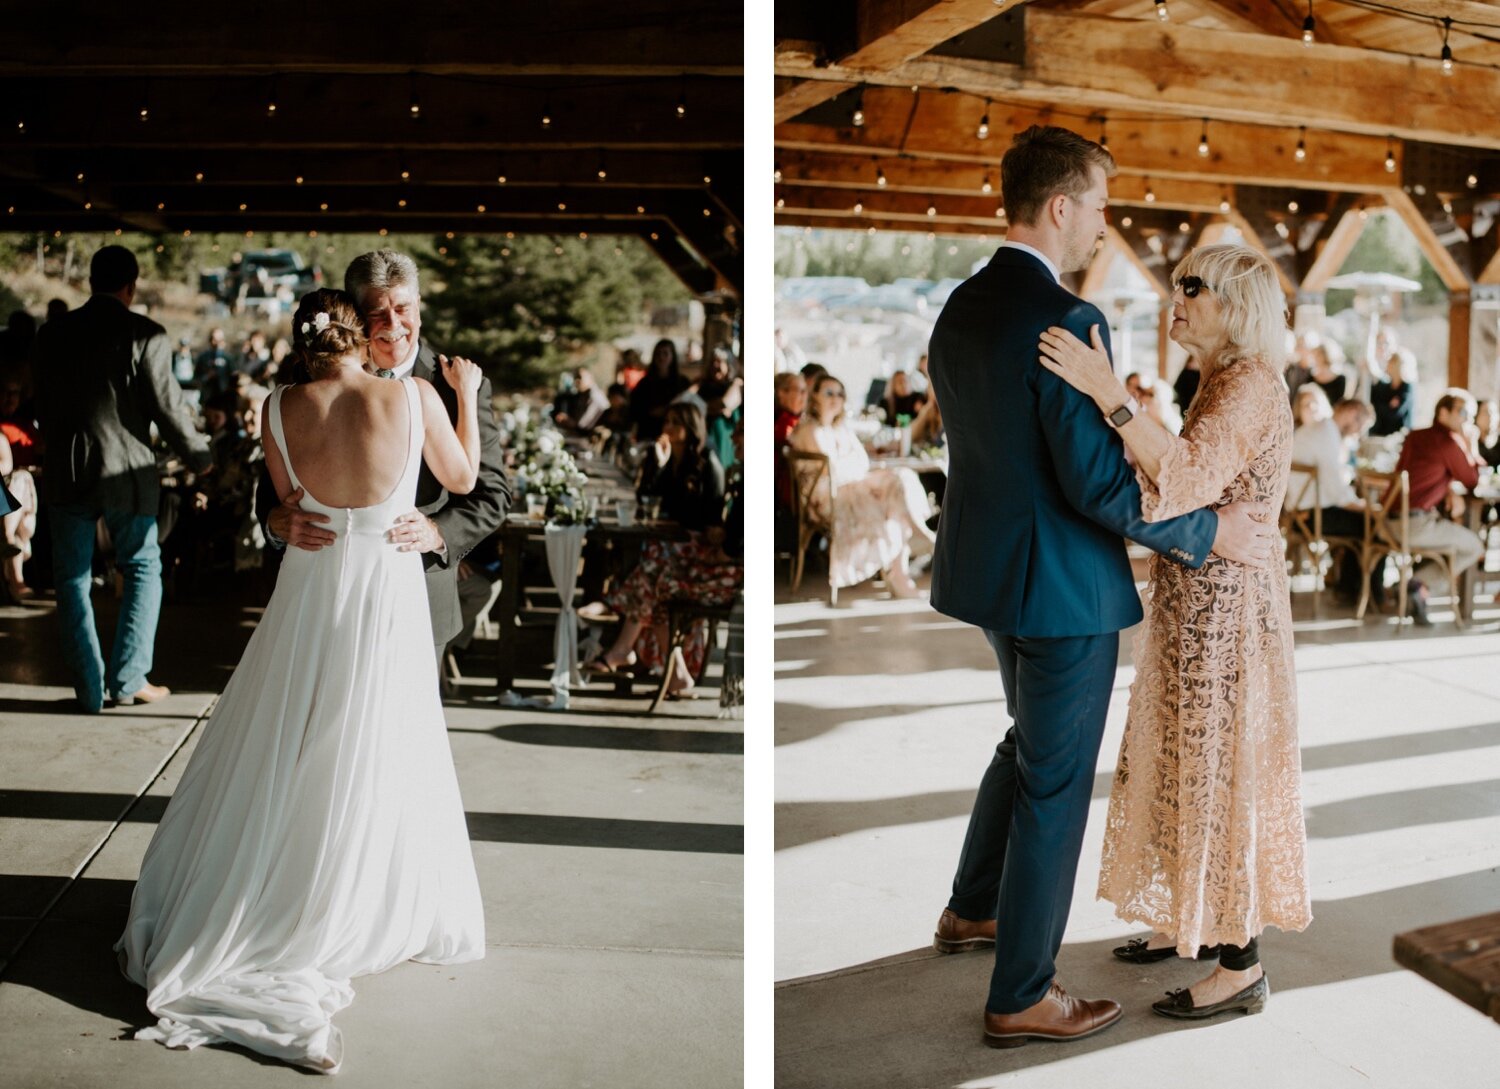  Father daughter dance, Mother son dance, Wedding Reception, Windy Point Campground Wedding Colorado, Dillon Colorado Wedding, Colorado mountain wedding, Dillon Colorado Wedding Photographer, Colorado Wedding Photographer, Colorado mountain wedding v